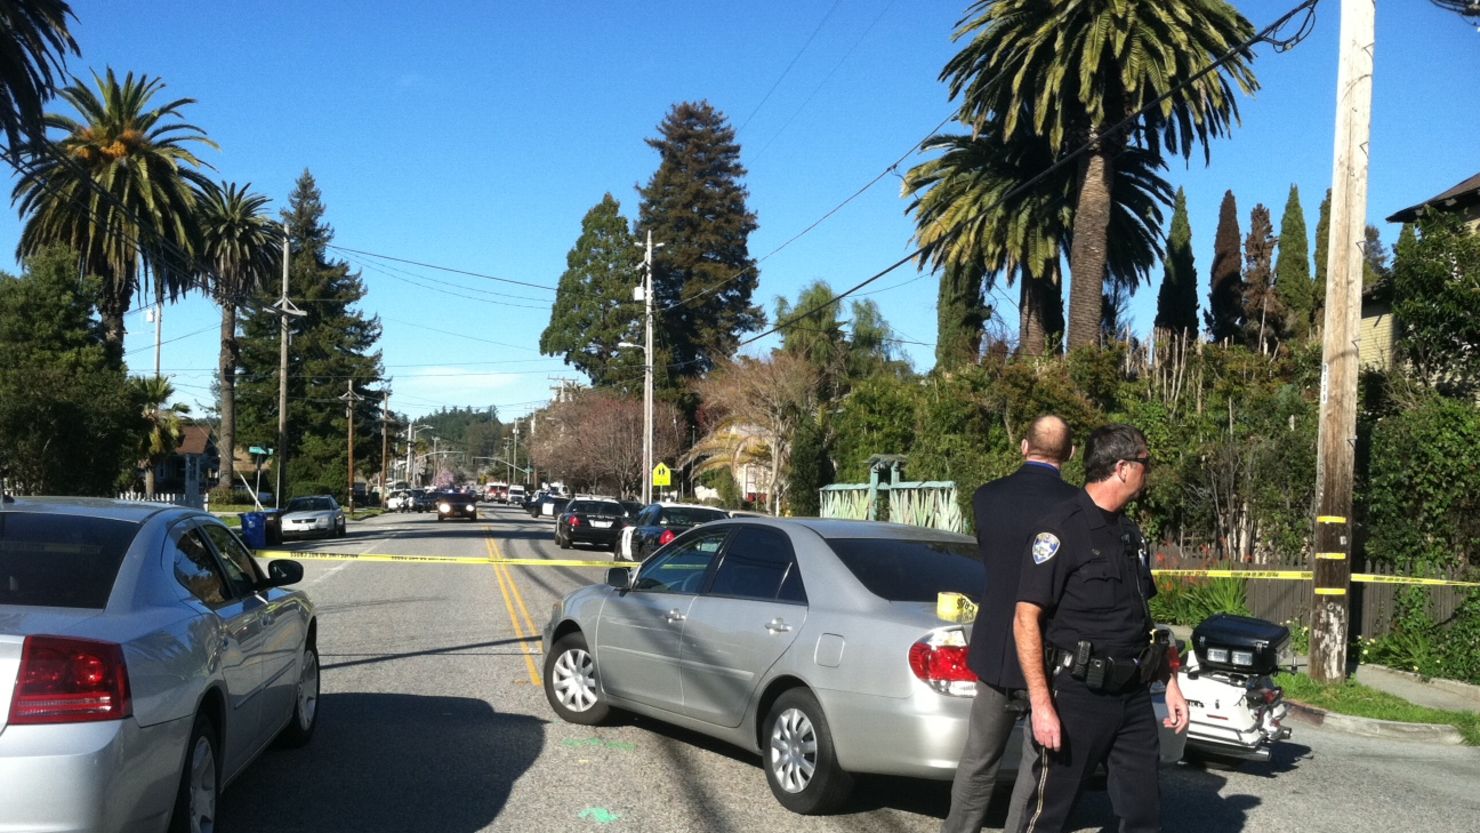 Police arrive on the scene in the aftermath of the shooting Tuesday of two police officers in Santa Cruz, California.